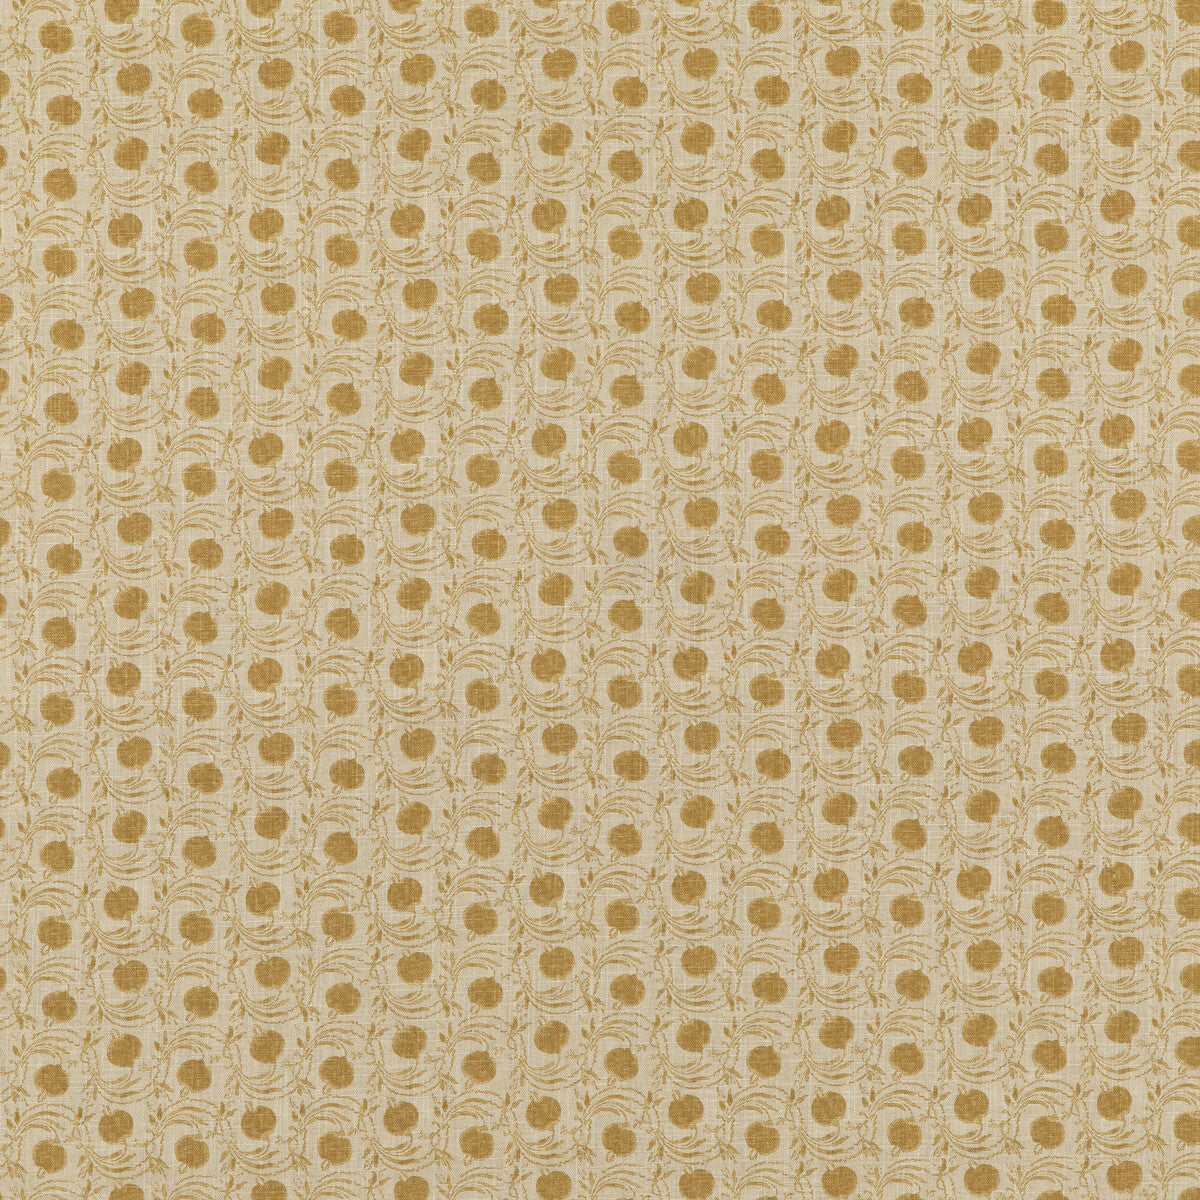 Seed Pod fabric in ochre color - pattern BP10824.3.0 - by G P &amp; J Baker in the Coromandel Small Prints collection